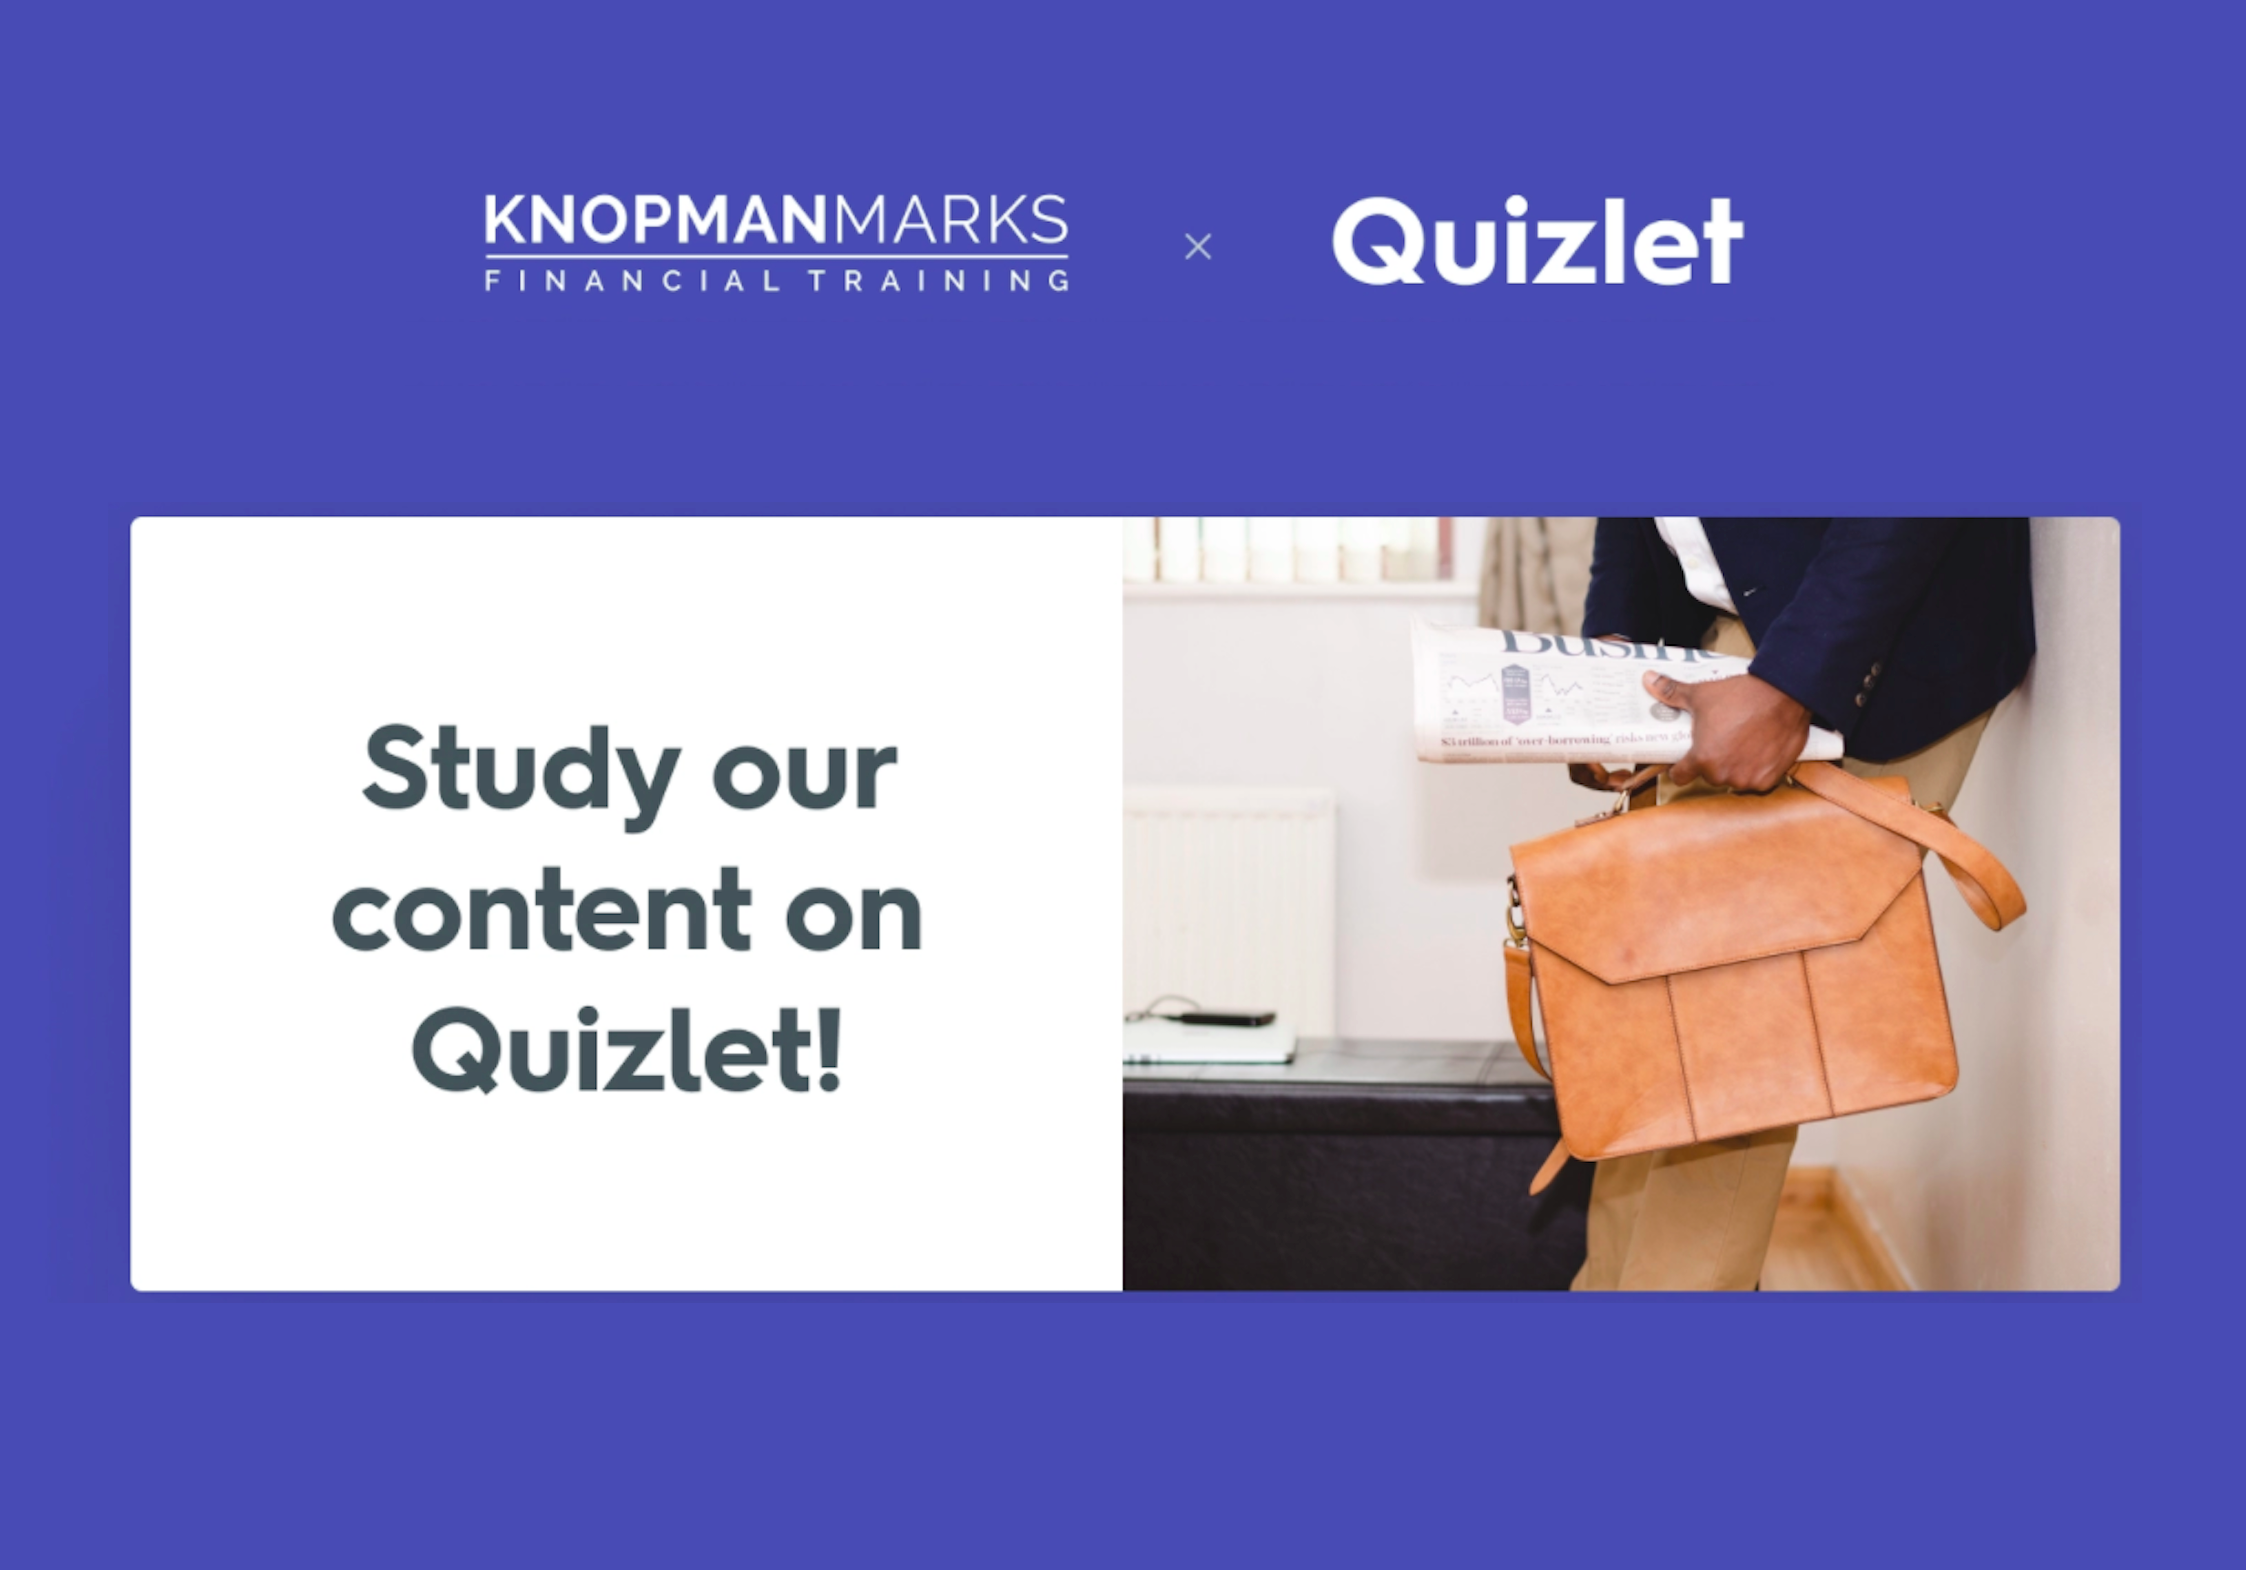 Knopman Marks’ New Partnership with Quizlet